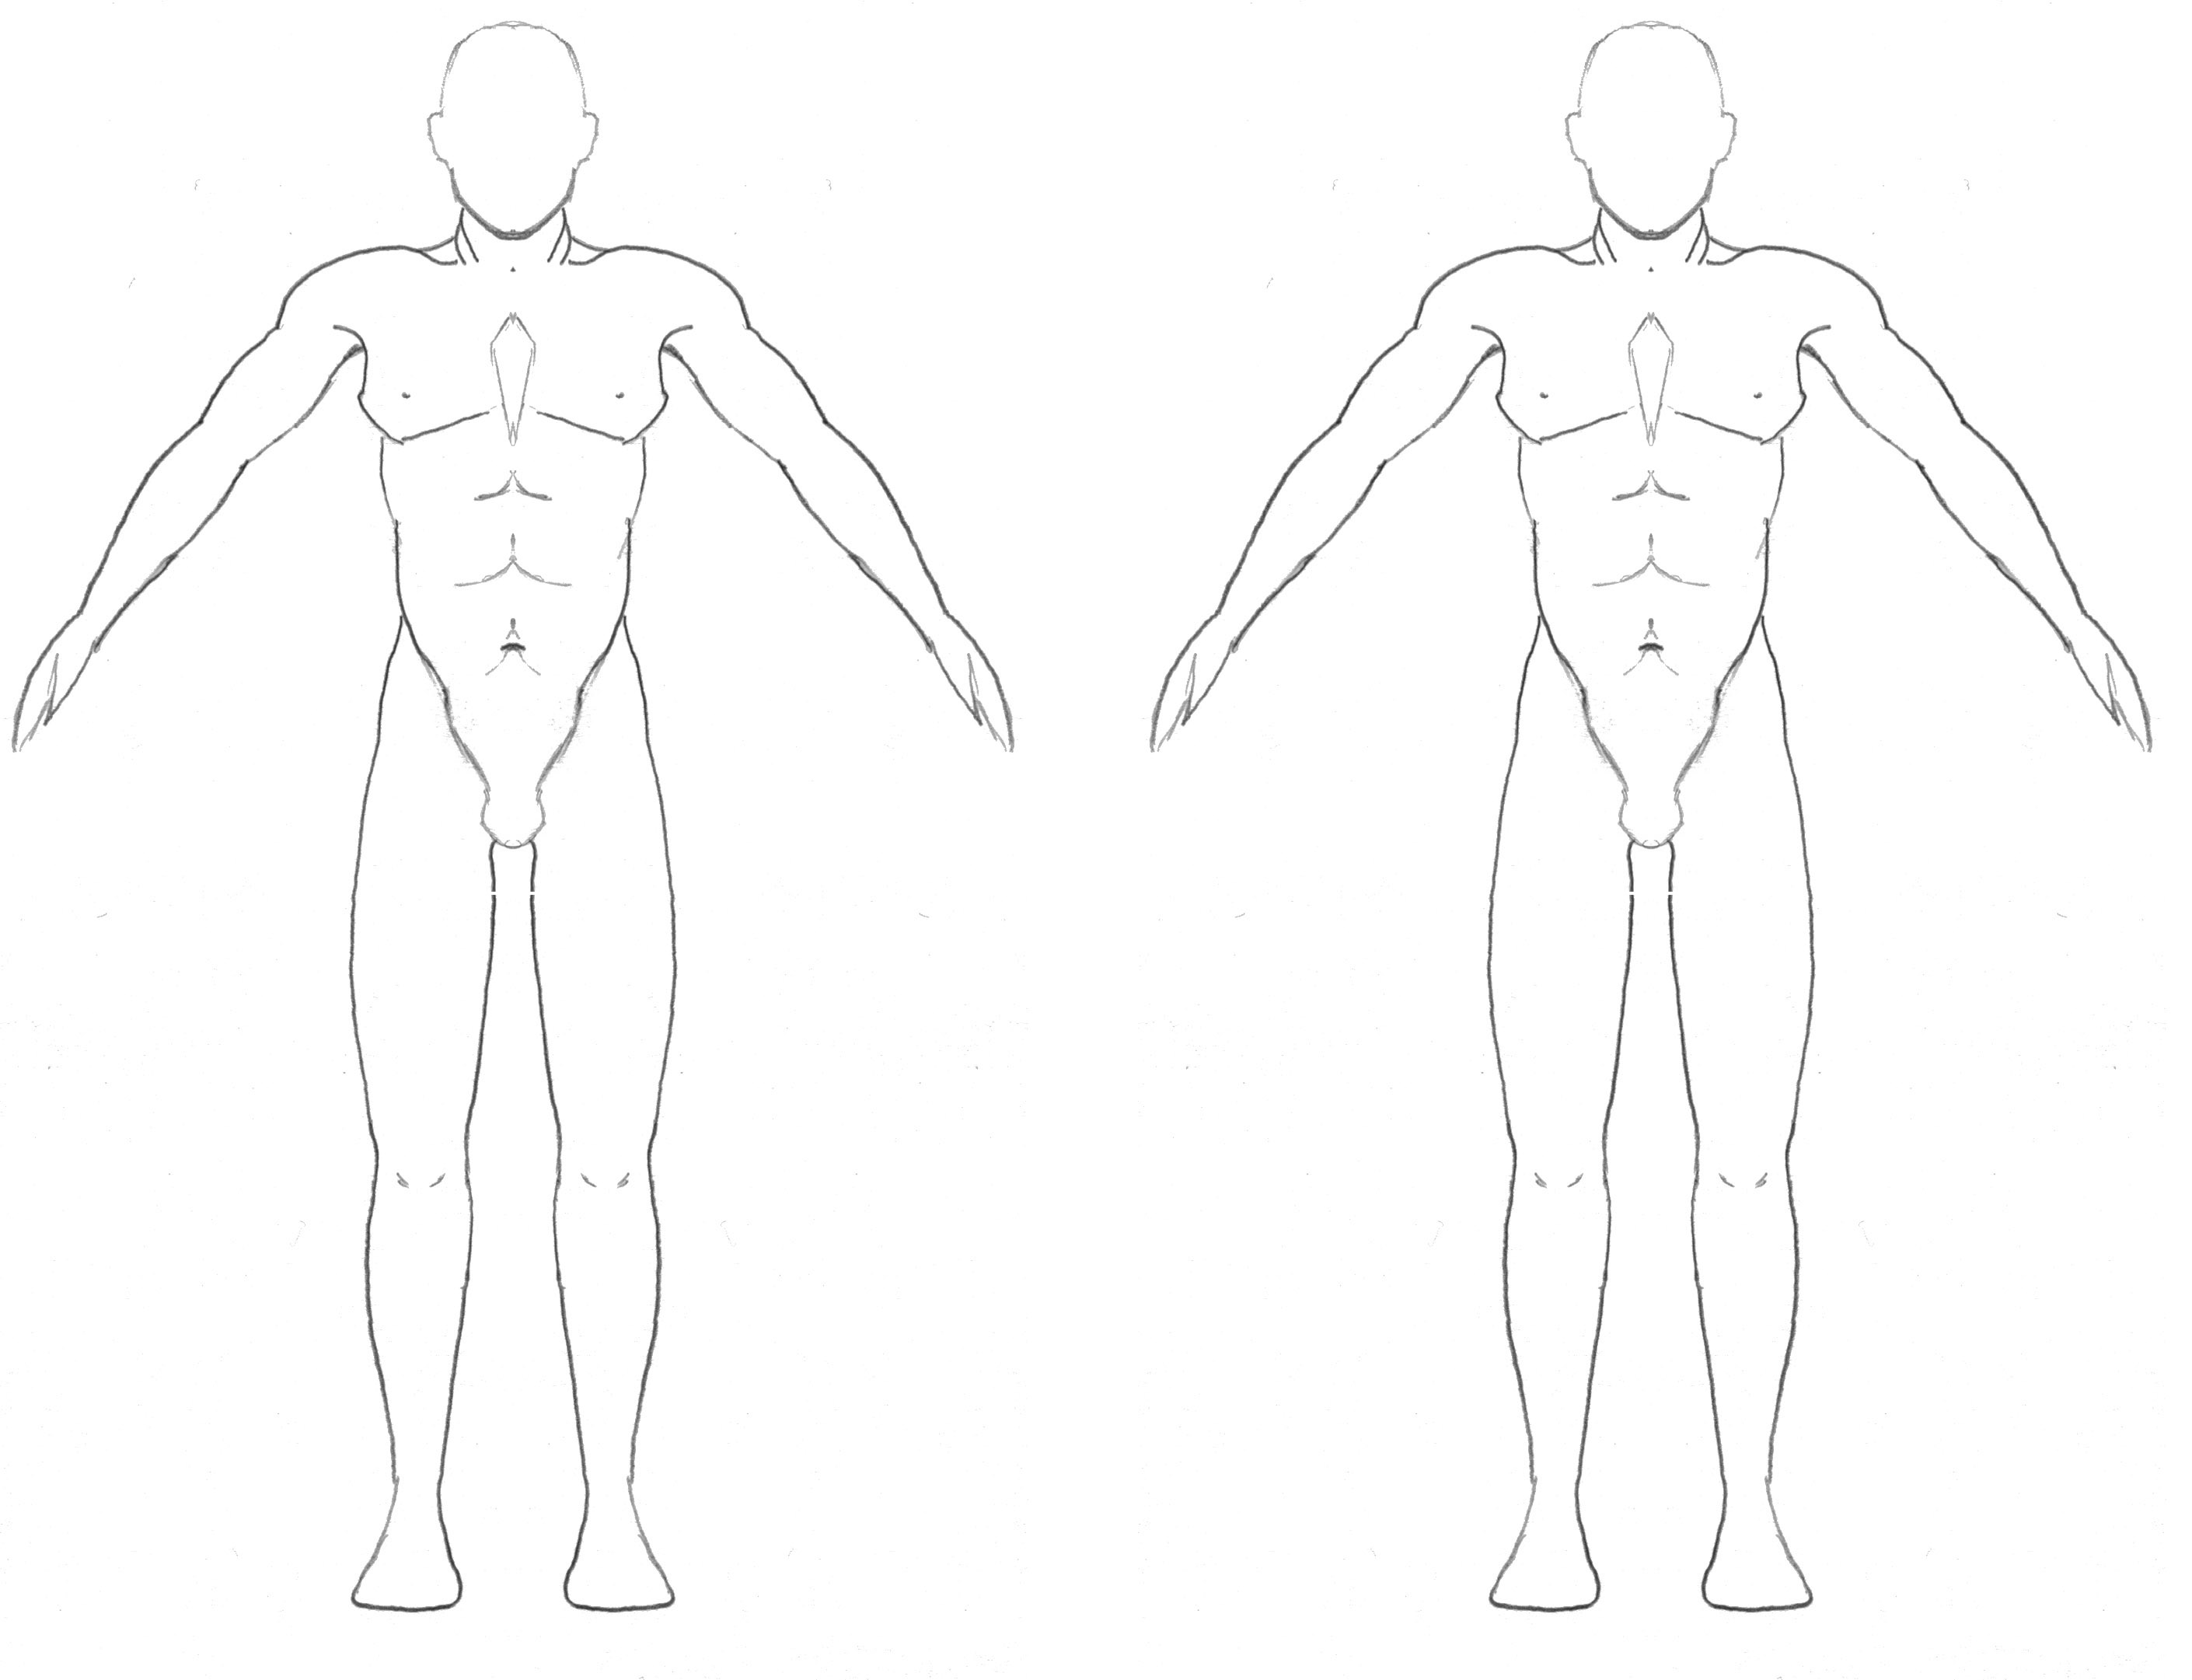 Blank Body Templates - Human Anatomy / Poses / Stances Outlines Clip Art Set